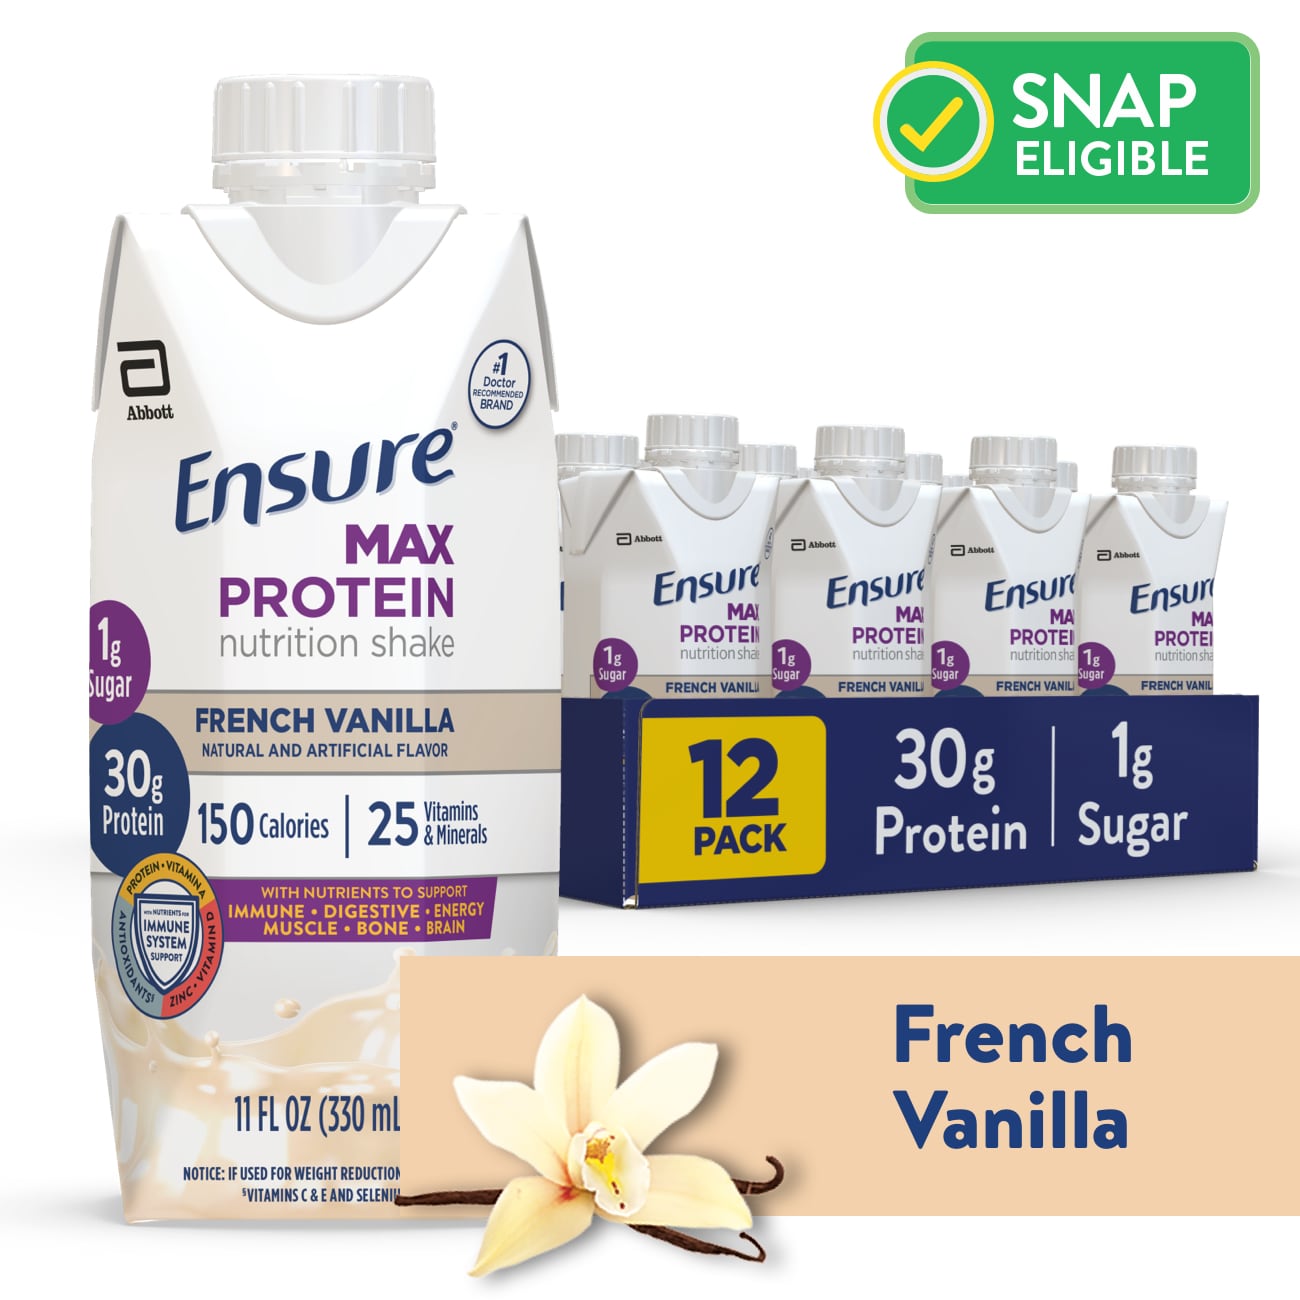 Ensure Max Protein Nutrition Shake, French Vanilla, 11 fl oz, 12 Count - image 1 of 16